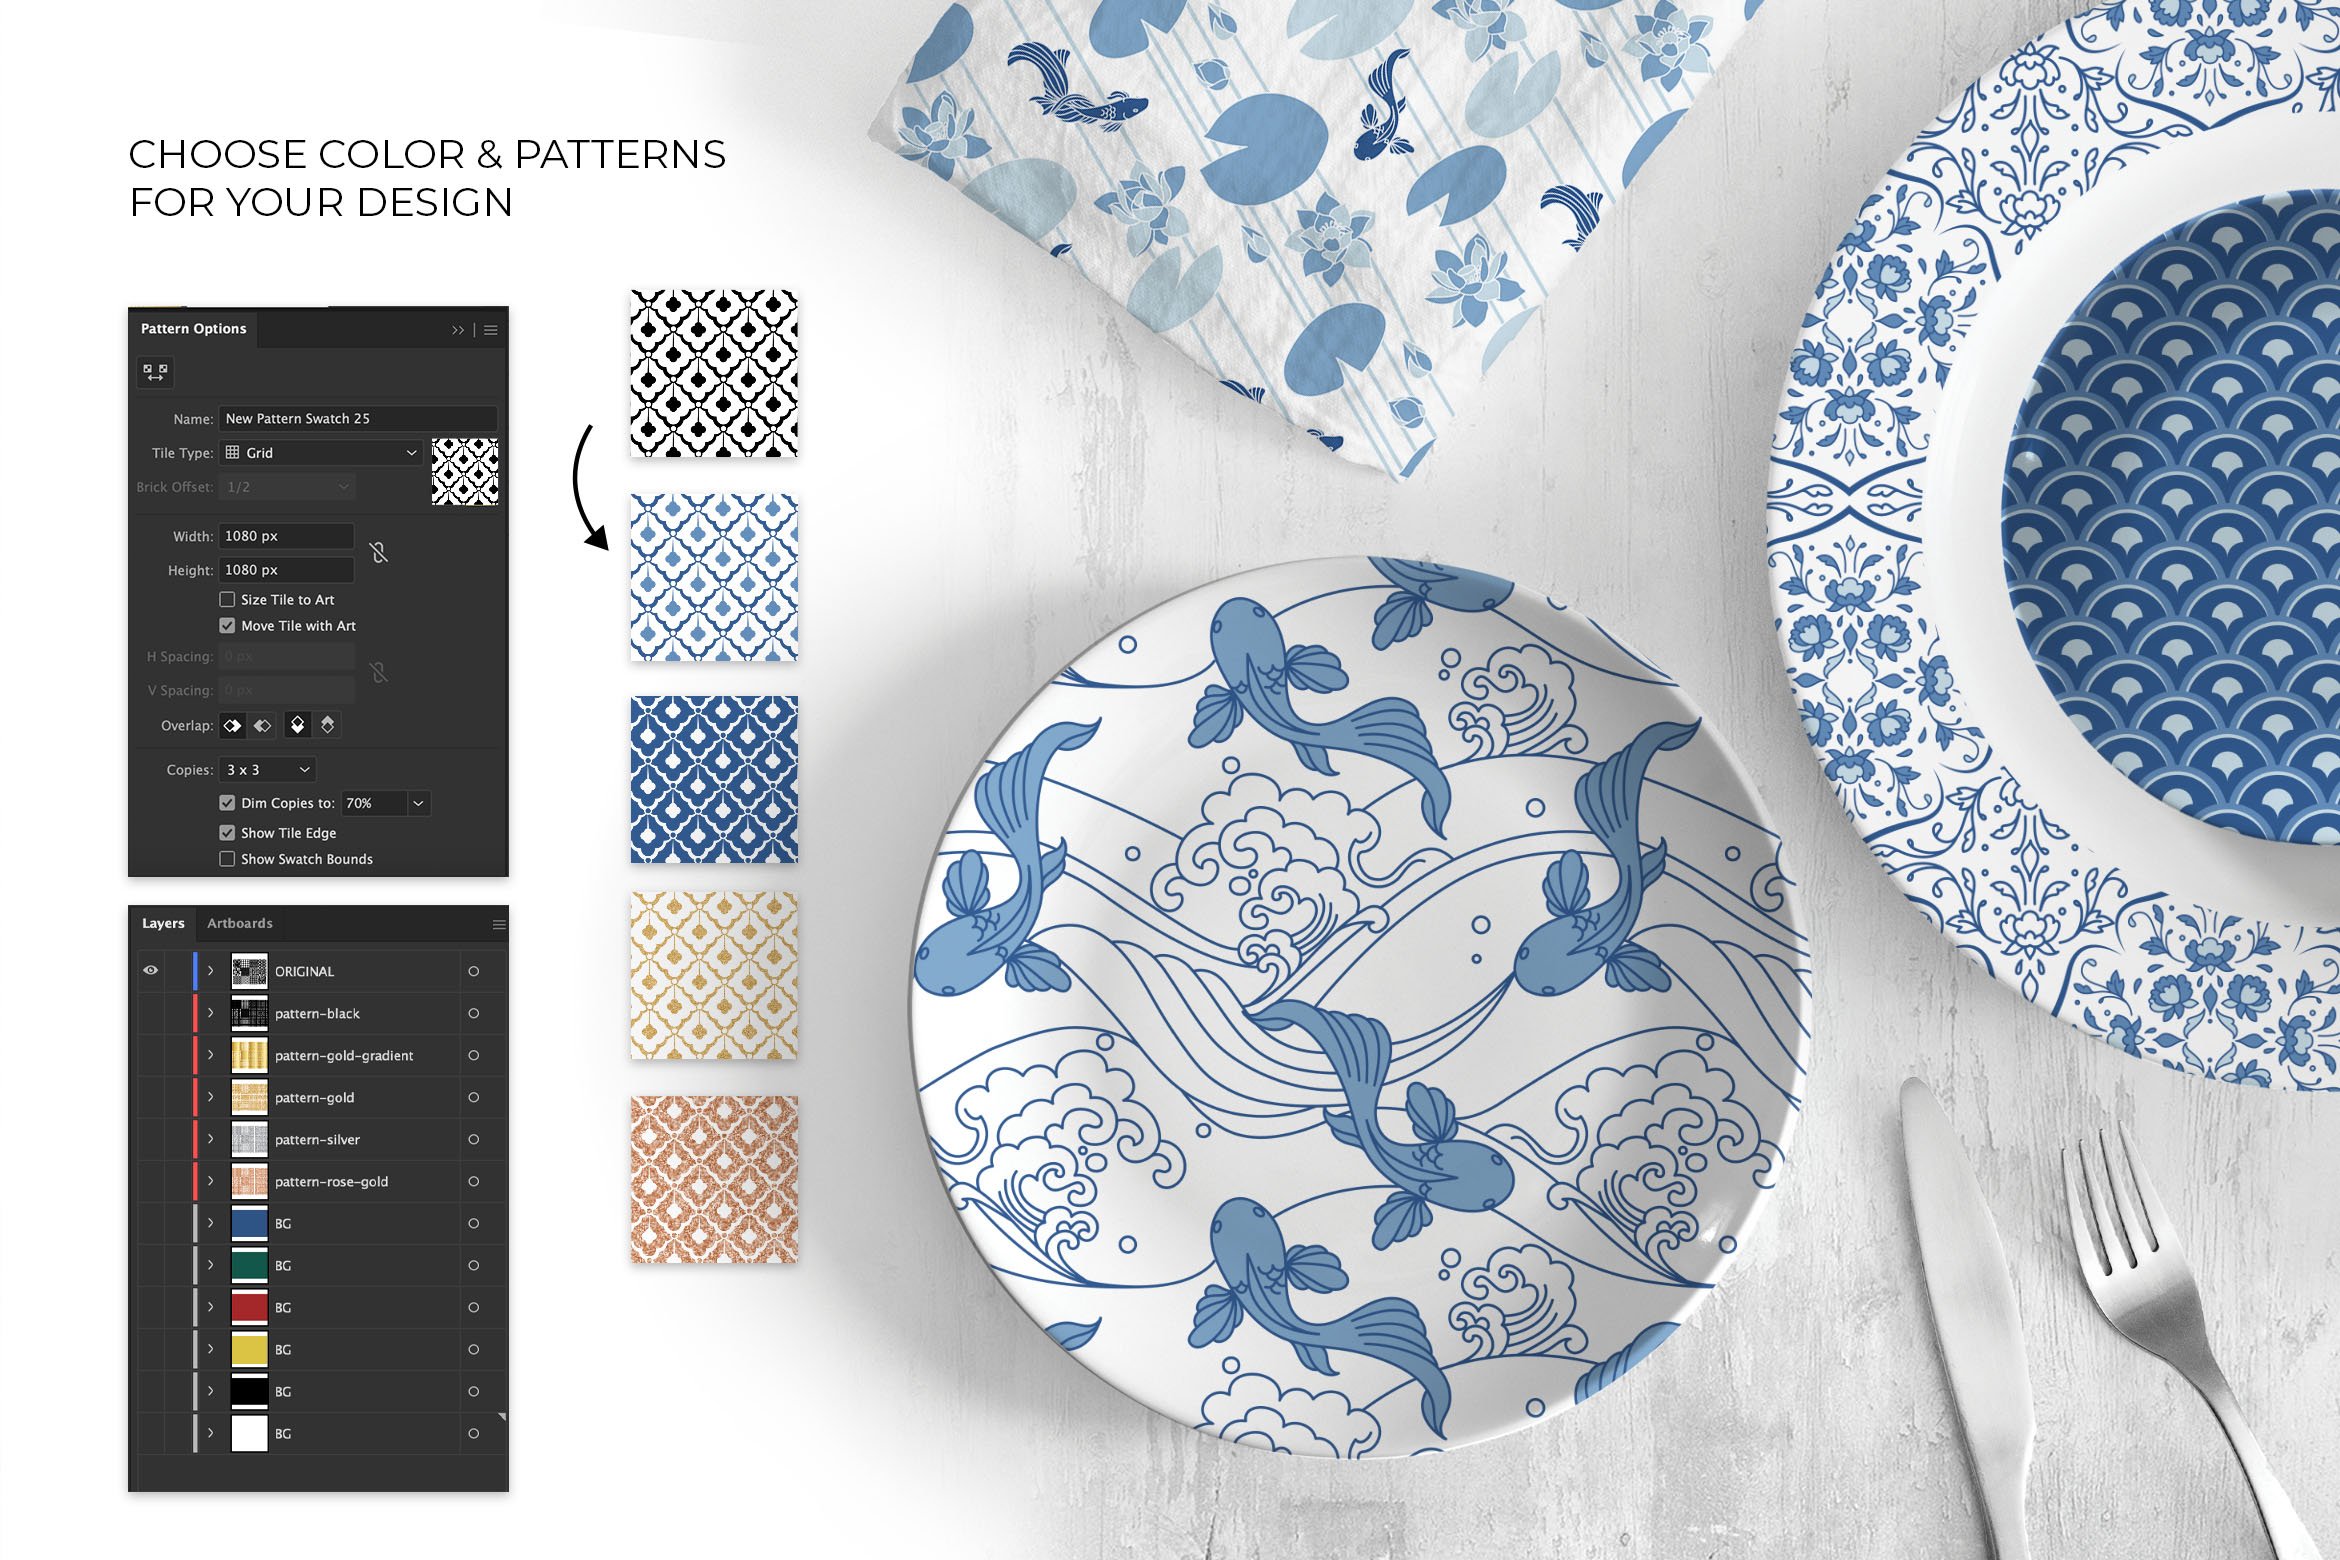 Japan: The Gigantic Textures and Patterns Collection